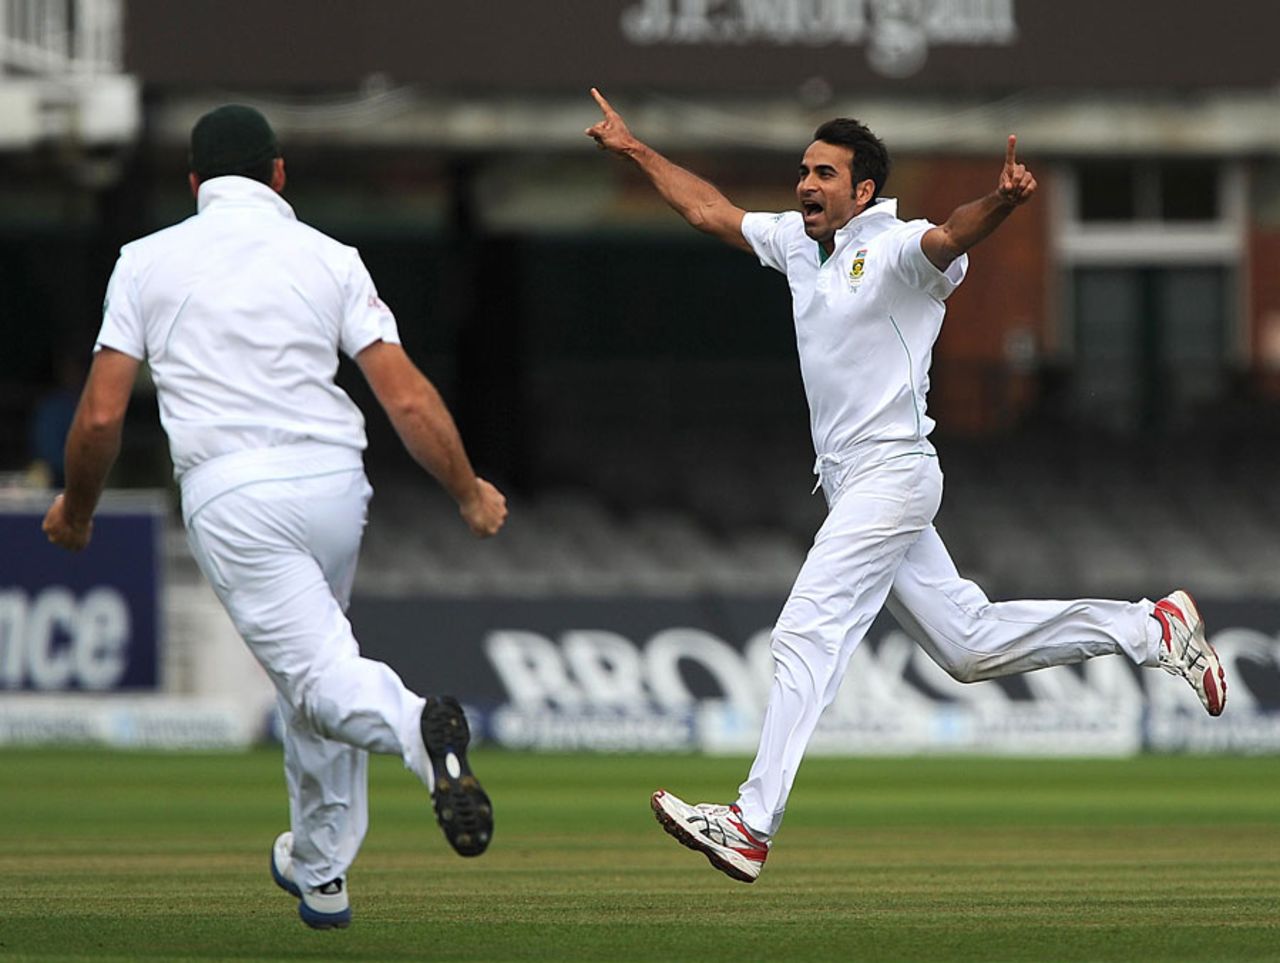 Imran Tahir enjoyed his success against Jonny Bairstow, England v South Africa, 3rd Investec Test, Lord's, 5th day, August 20, 2012